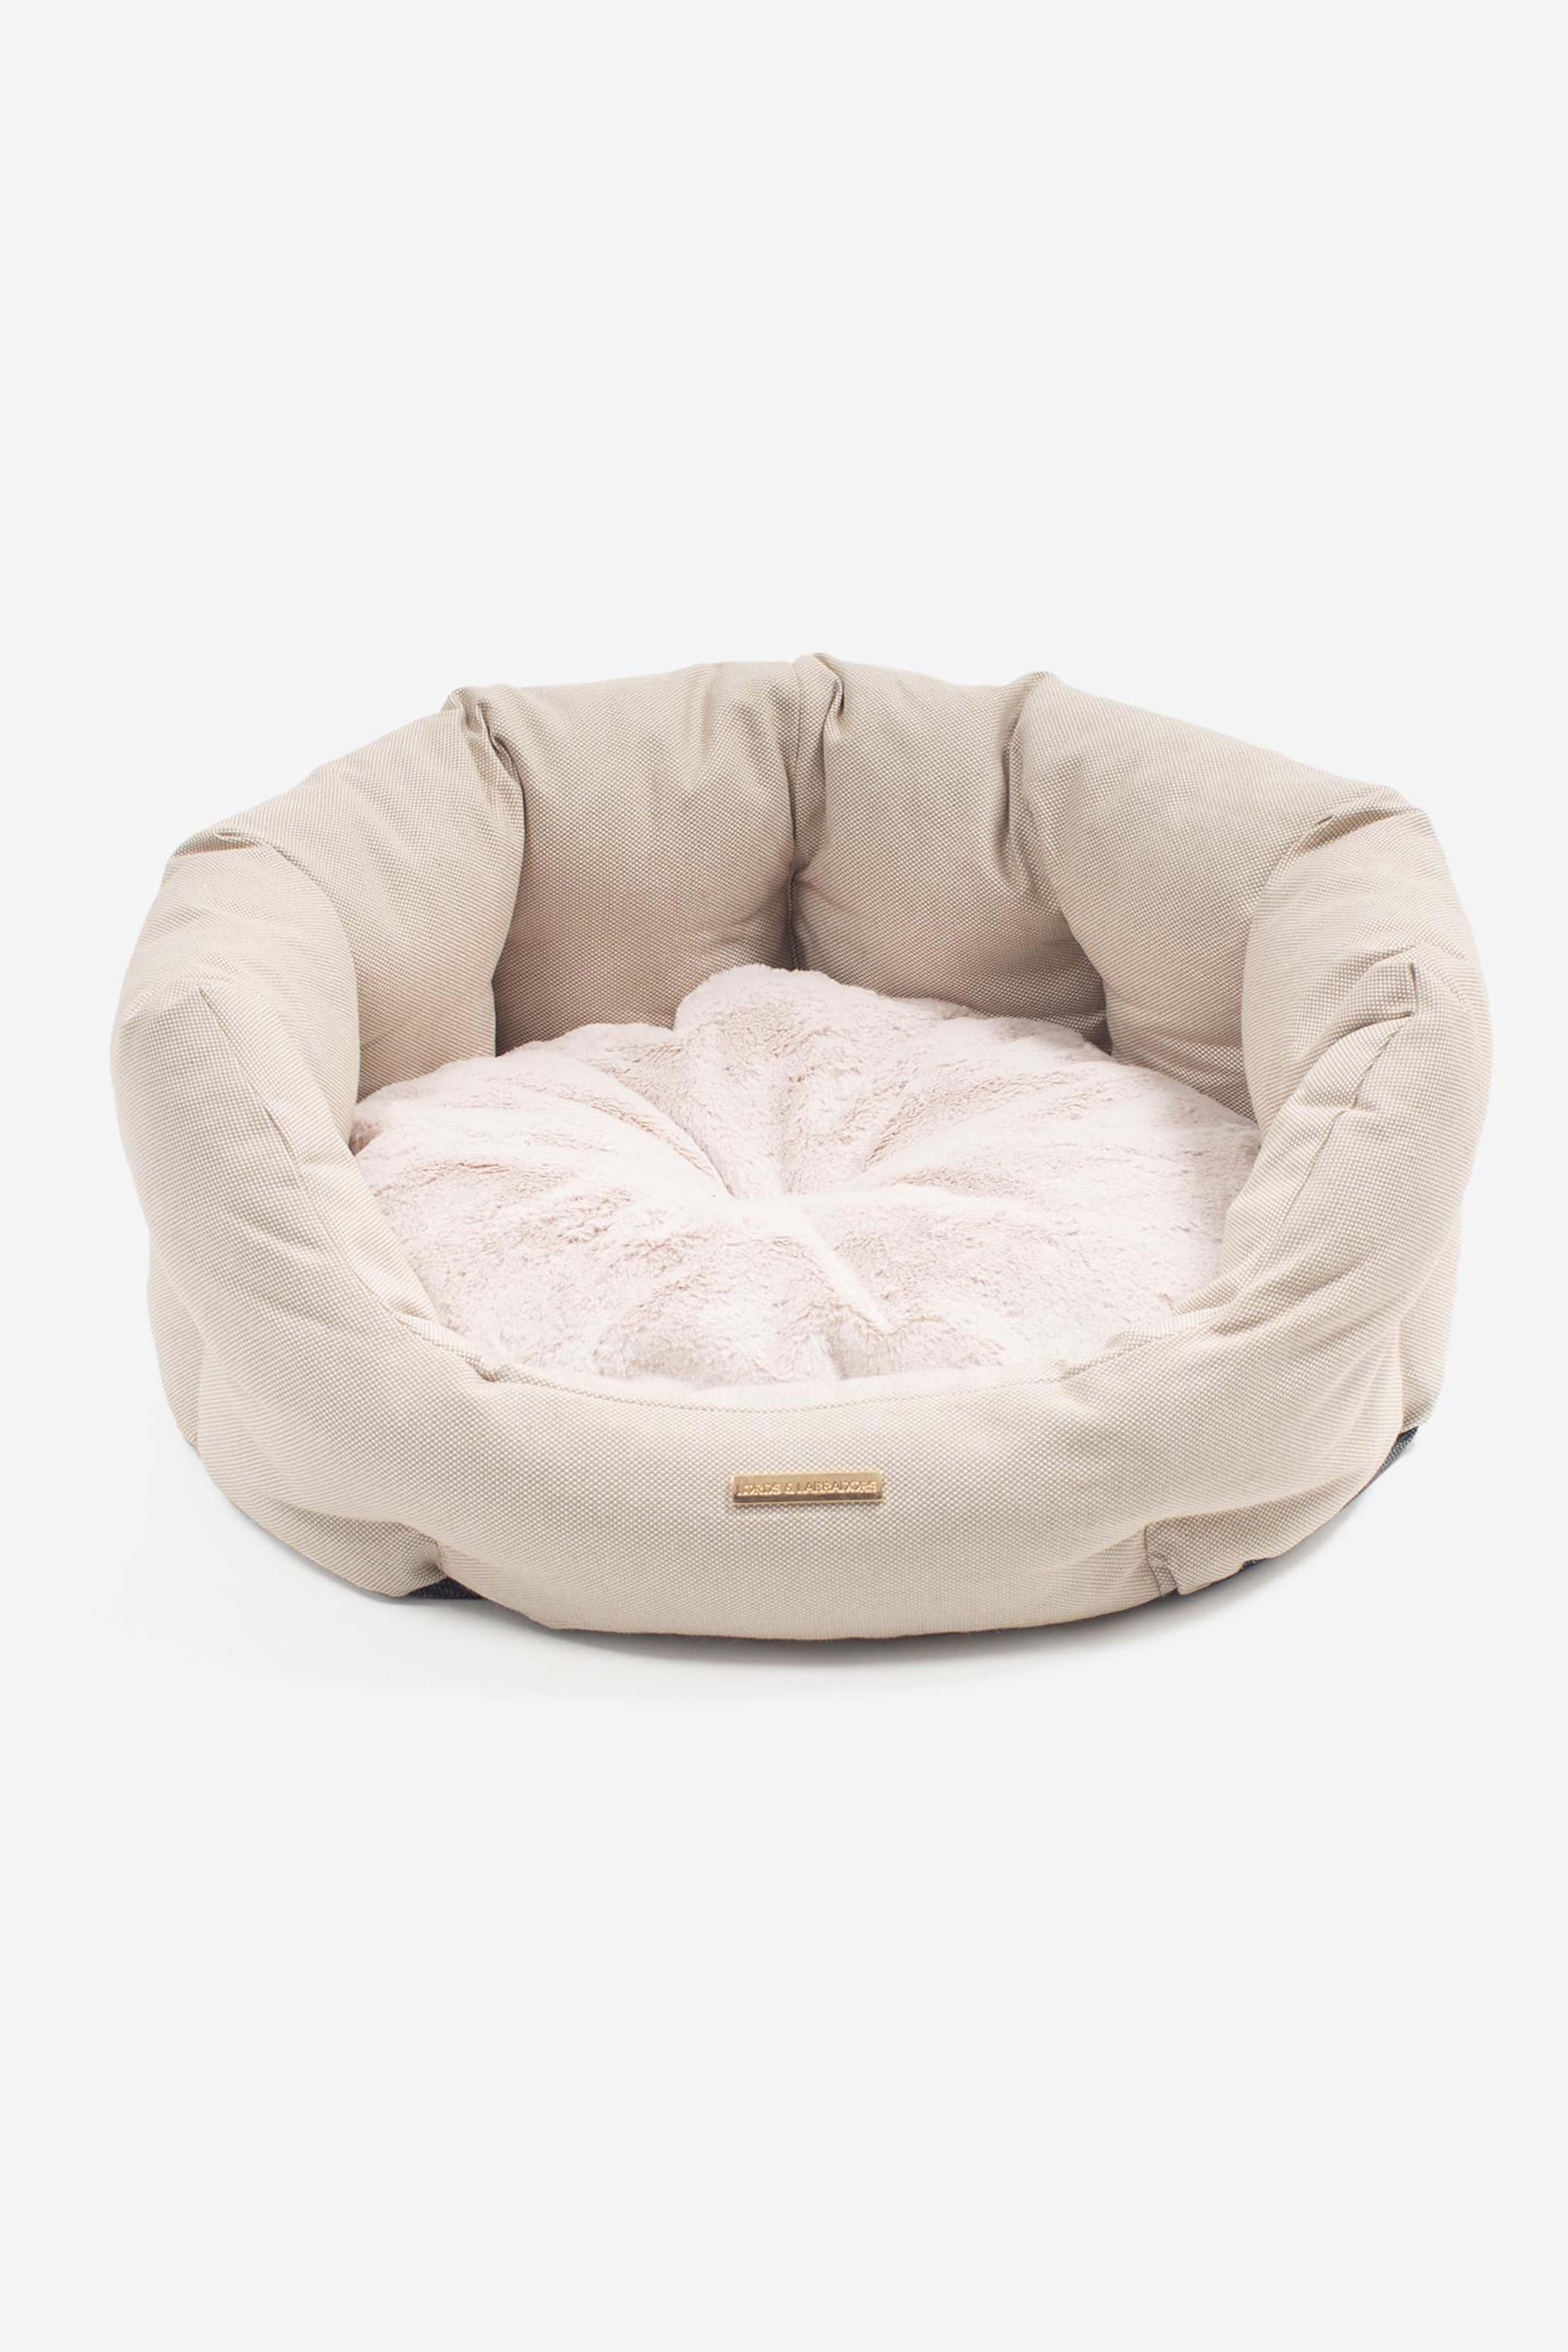 Essentials Twill Oval Dog Beds